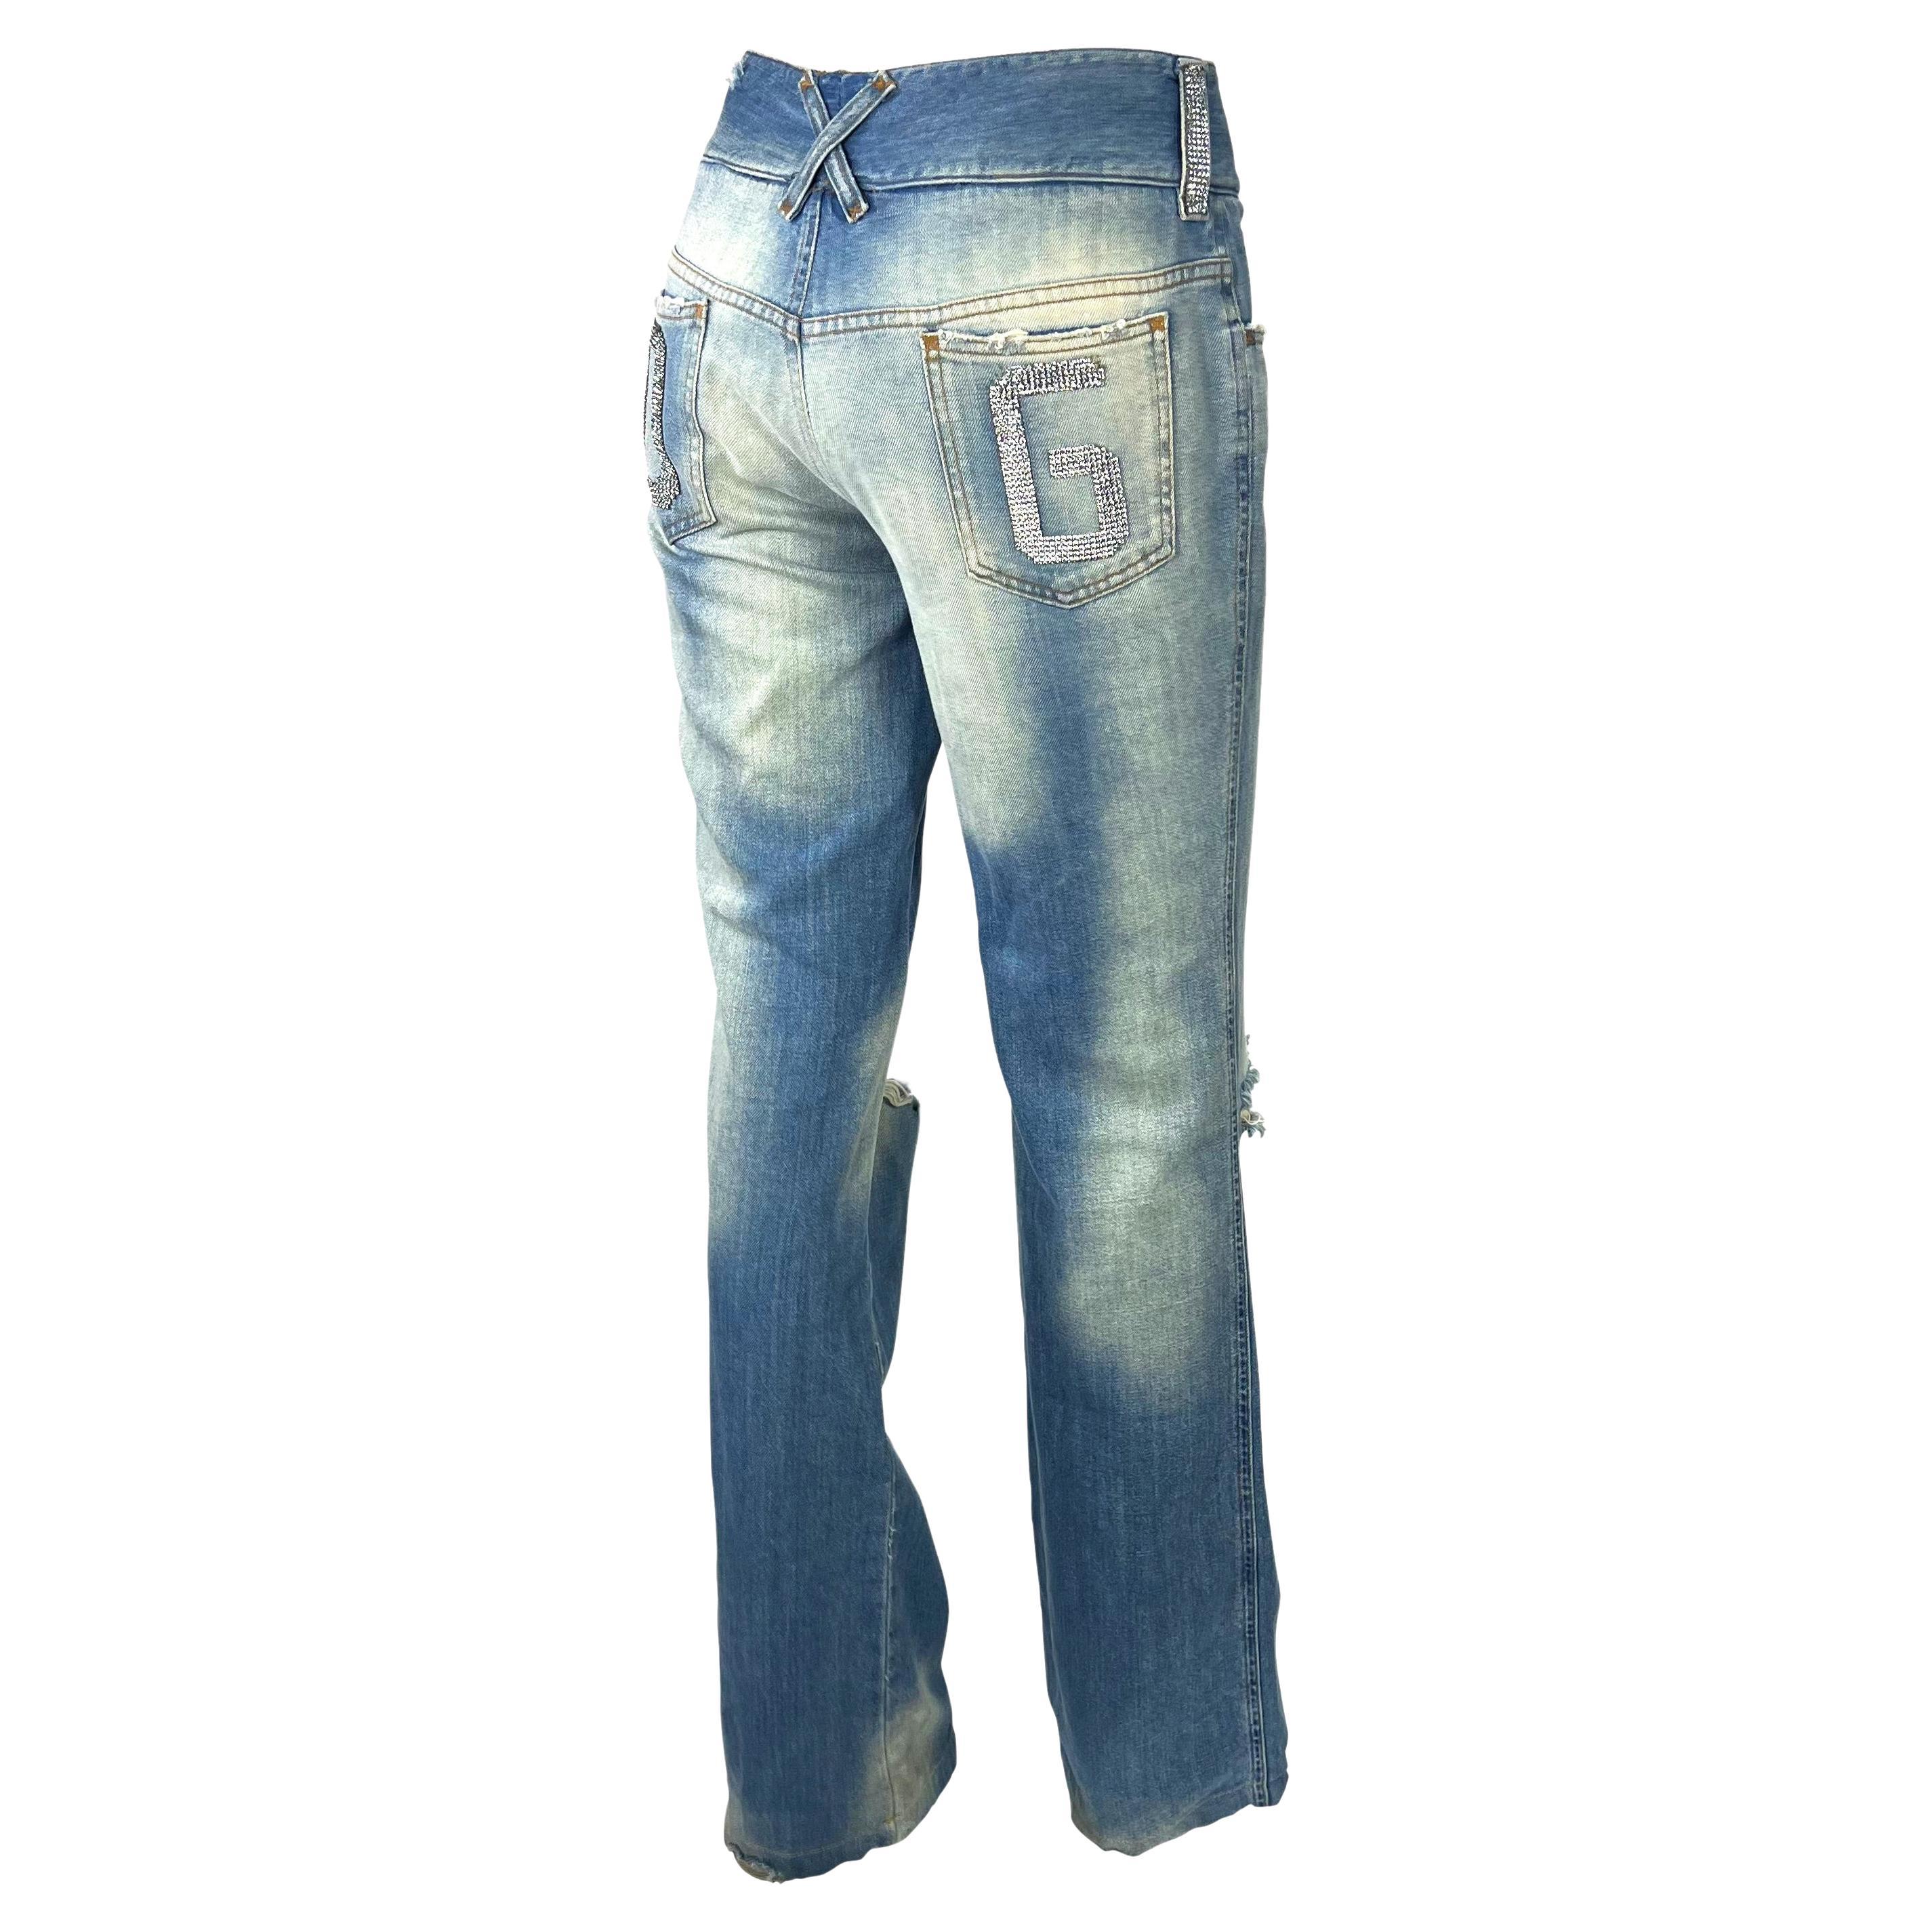 Presenting a fabulous pair of distressed low-rise Dolce and Gabbana jeans. From the Spring/Summer 2003 